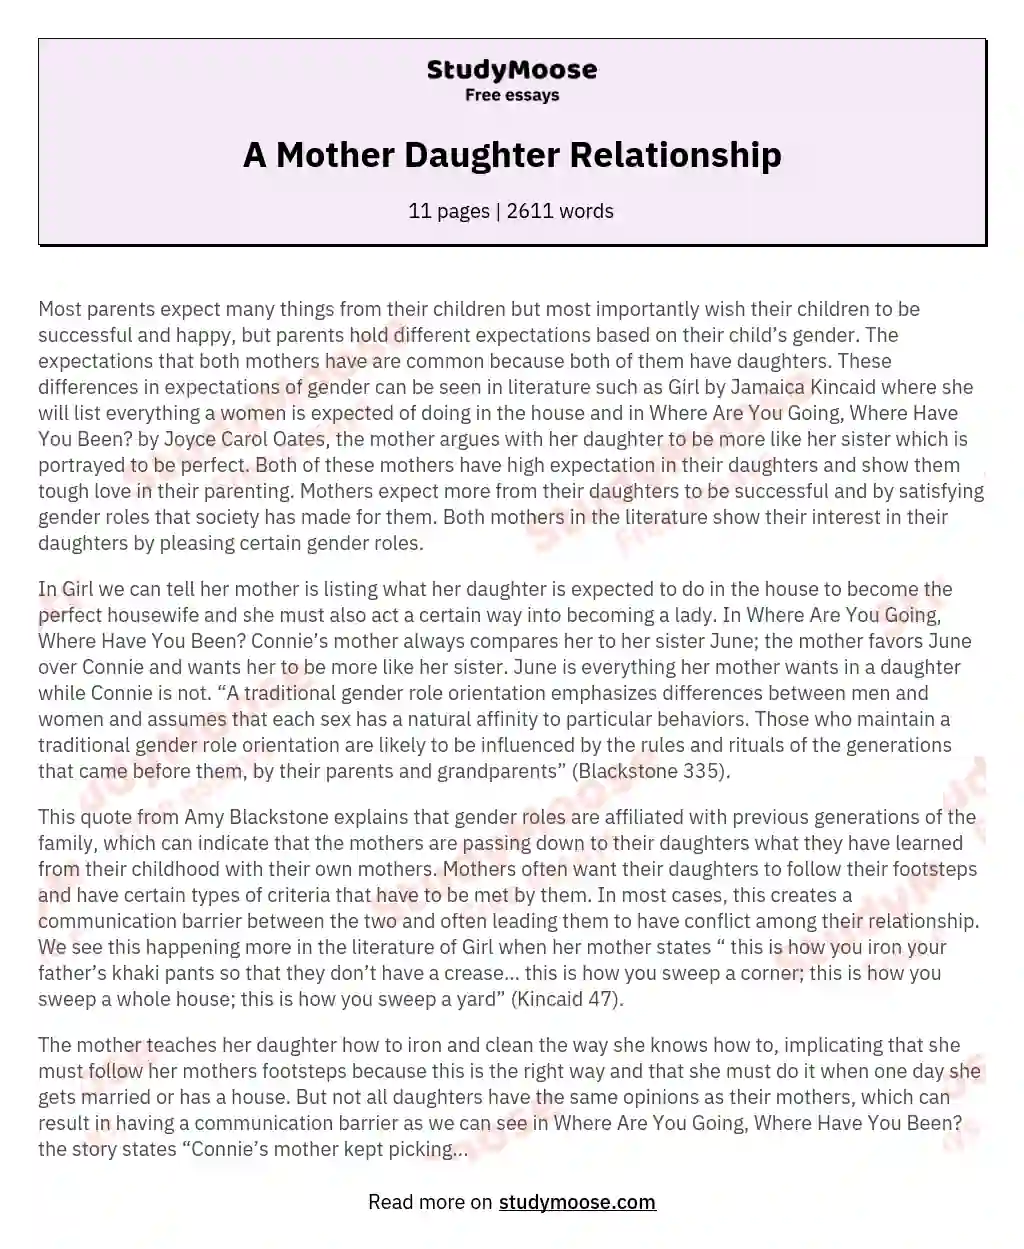 A Mother Daughter Relationship Free Essay Example